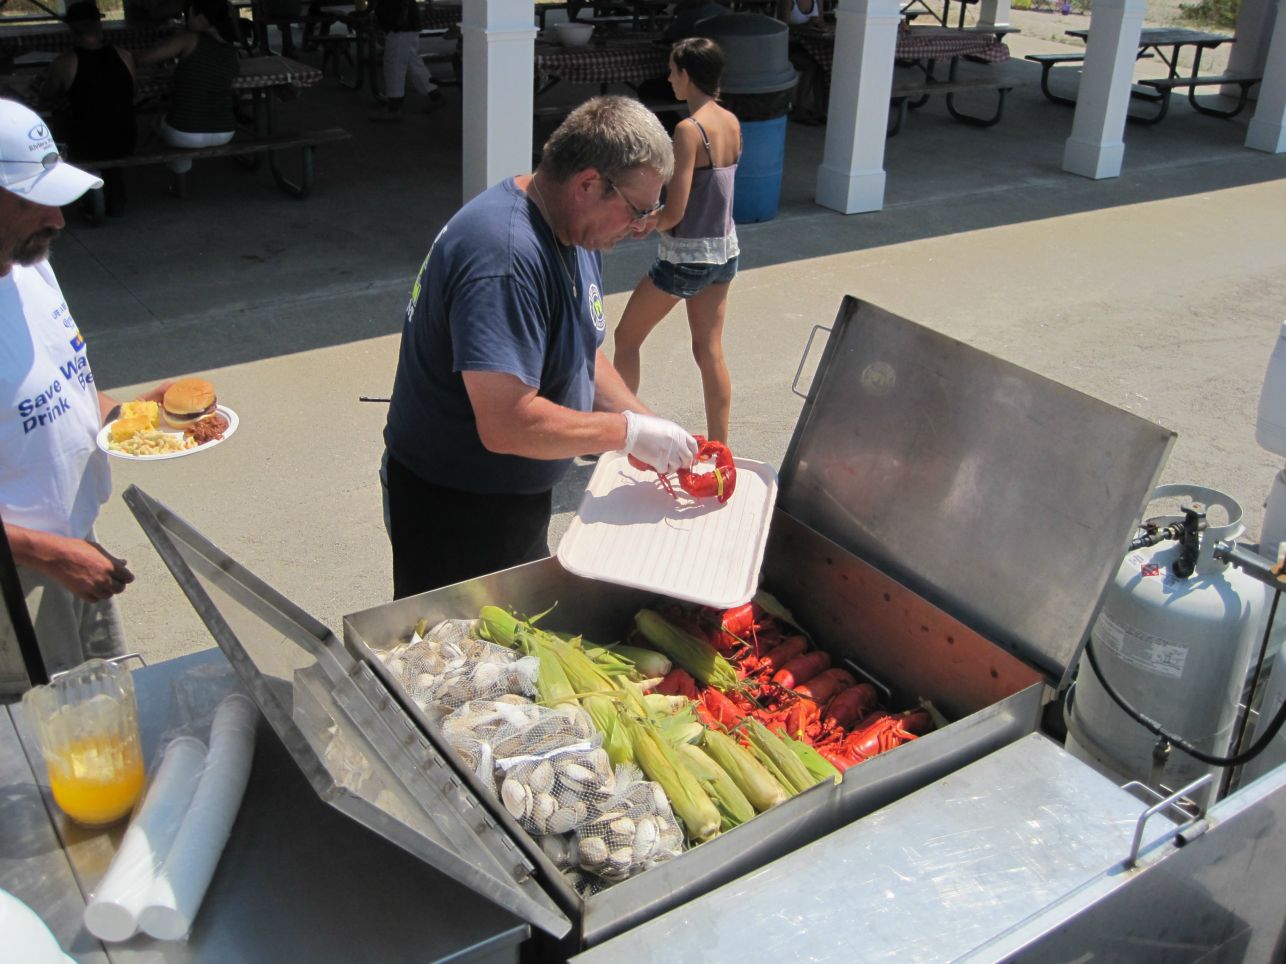 LOBSTERS APLENTY AT THE ANNUAL EMPLOYEE LOBSTER BAKE.